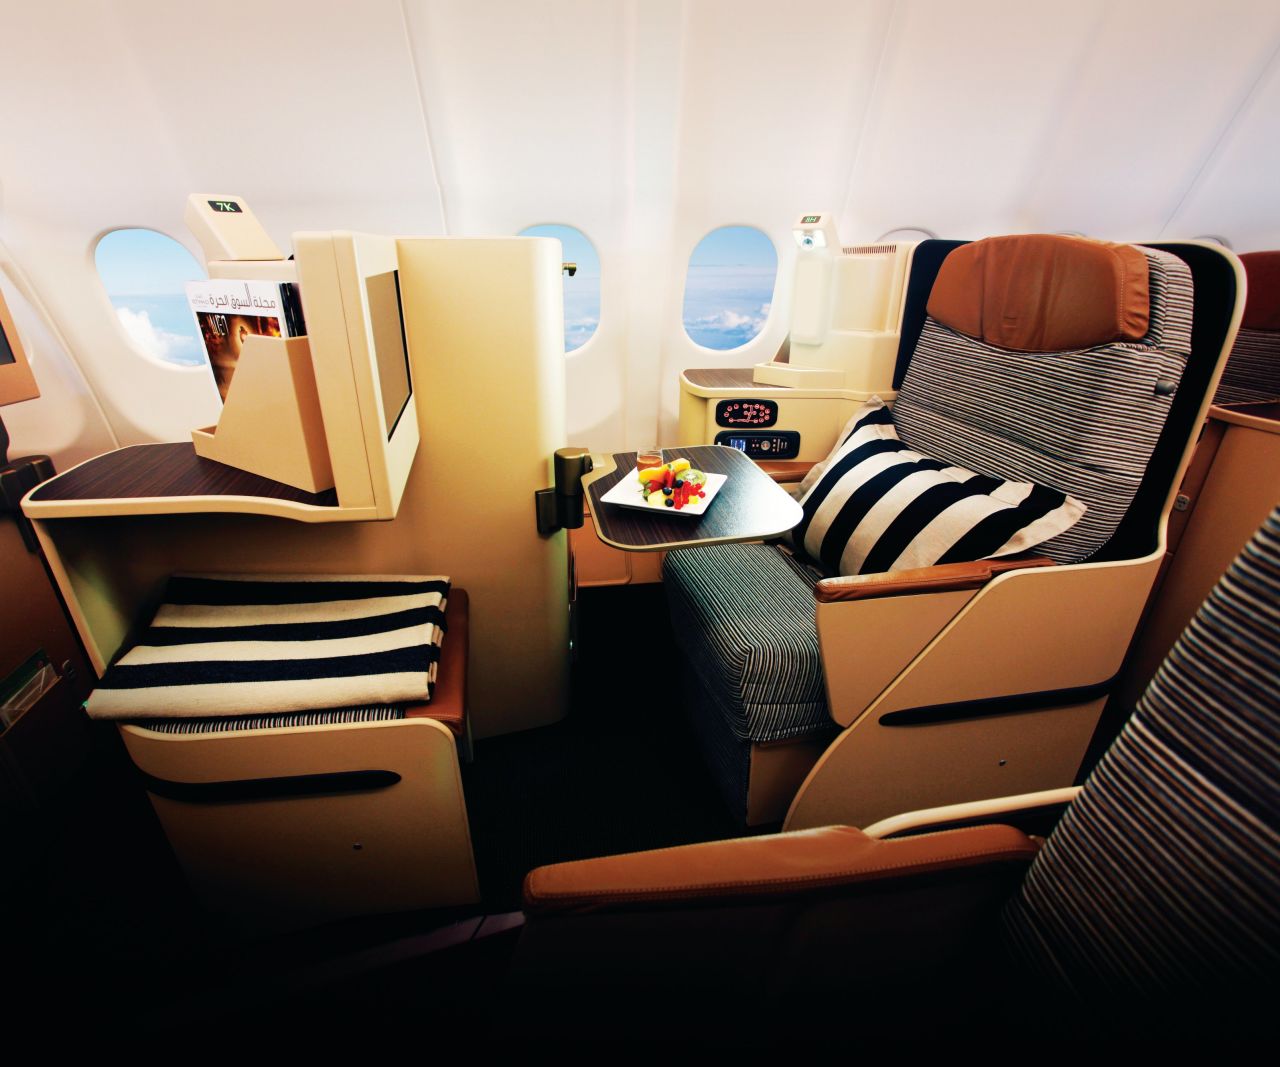 Comfortable with stylish fittings, Etihad airways offer business class seating to make you feel at home. The airline took 9th place in this year's World Airline Awards.